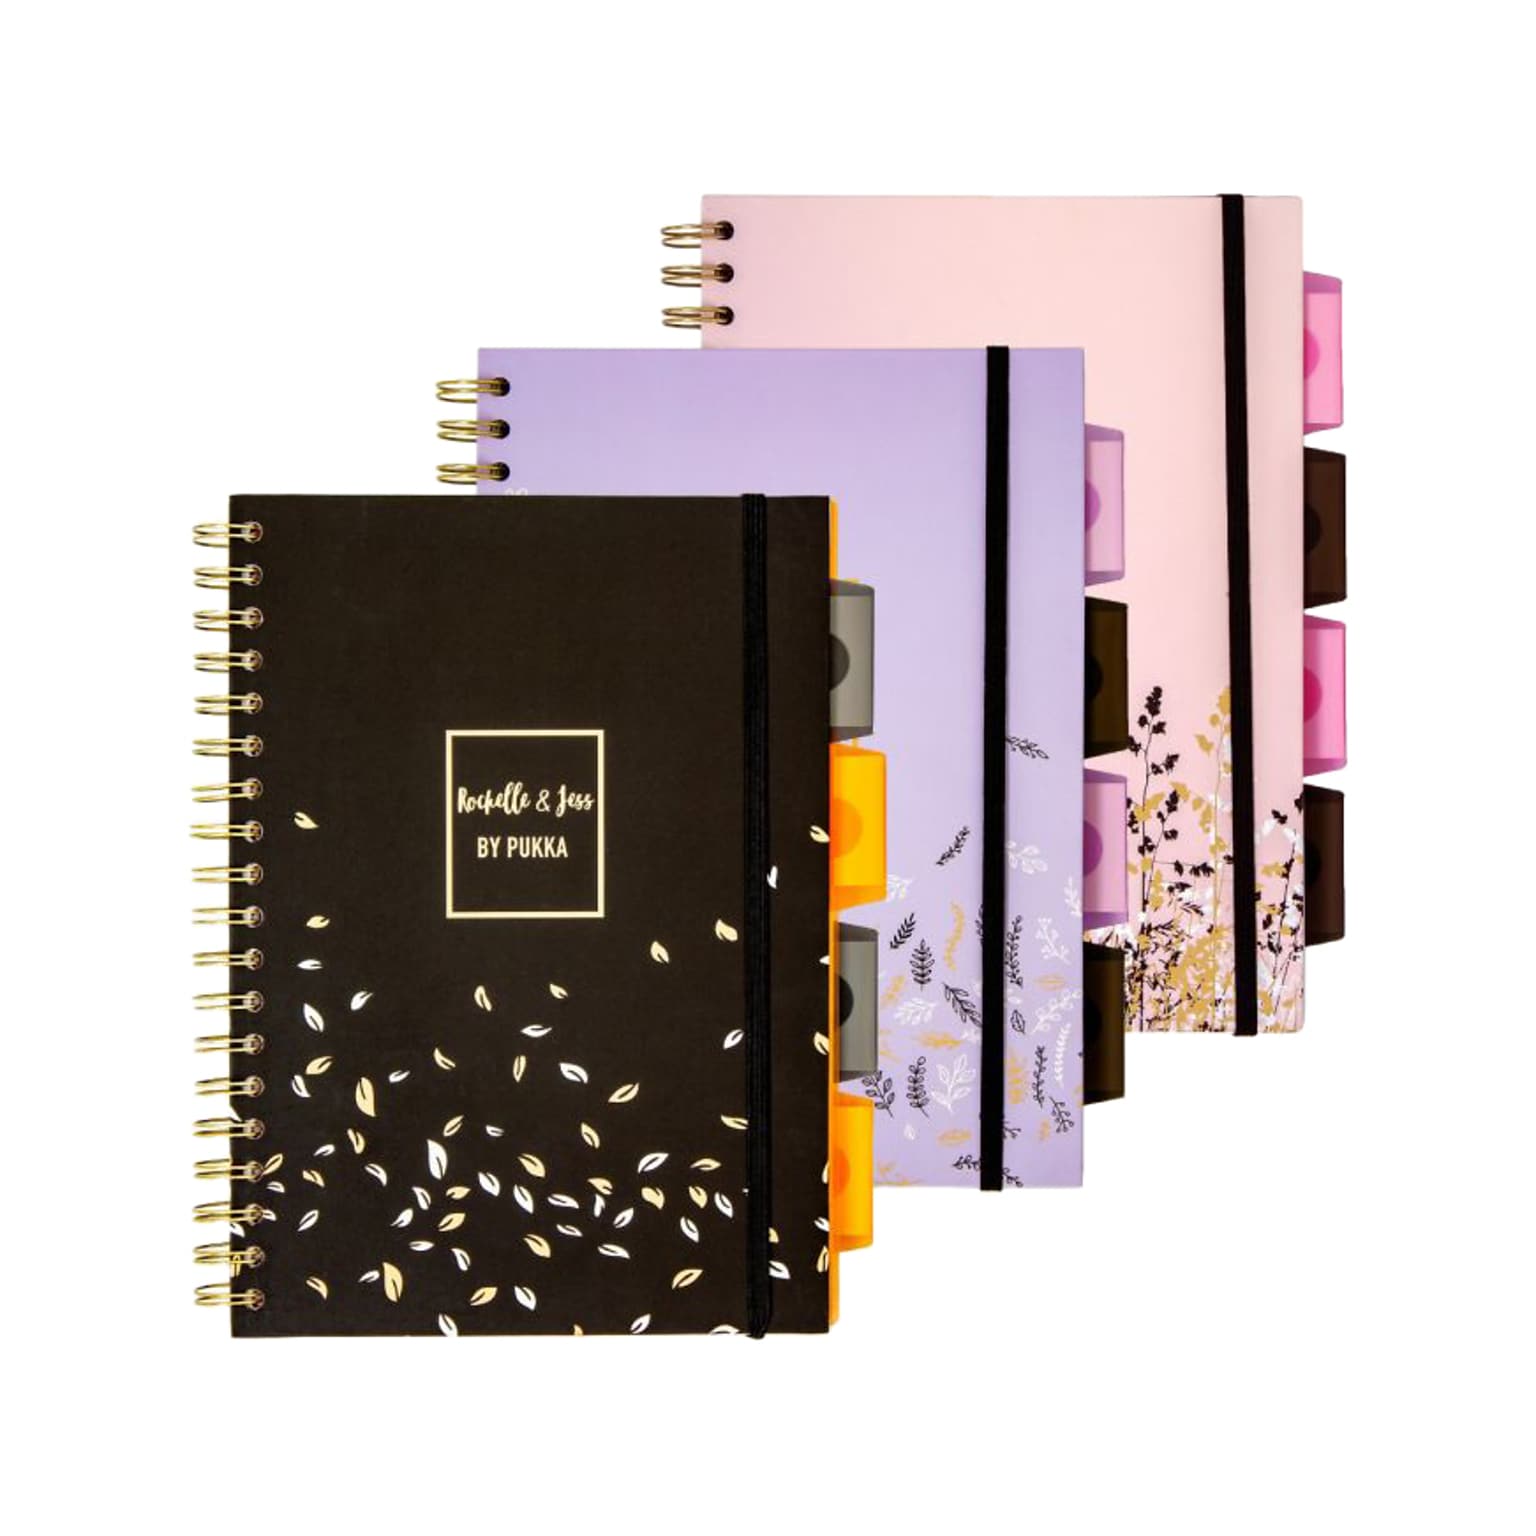 Pukka Pad Rochelle & Jess 5-Subject Notebooks, 6.9 x 9.8, Ruled, 100 Sheets, Assorted Colors, 3/Pack (9447-ROC)